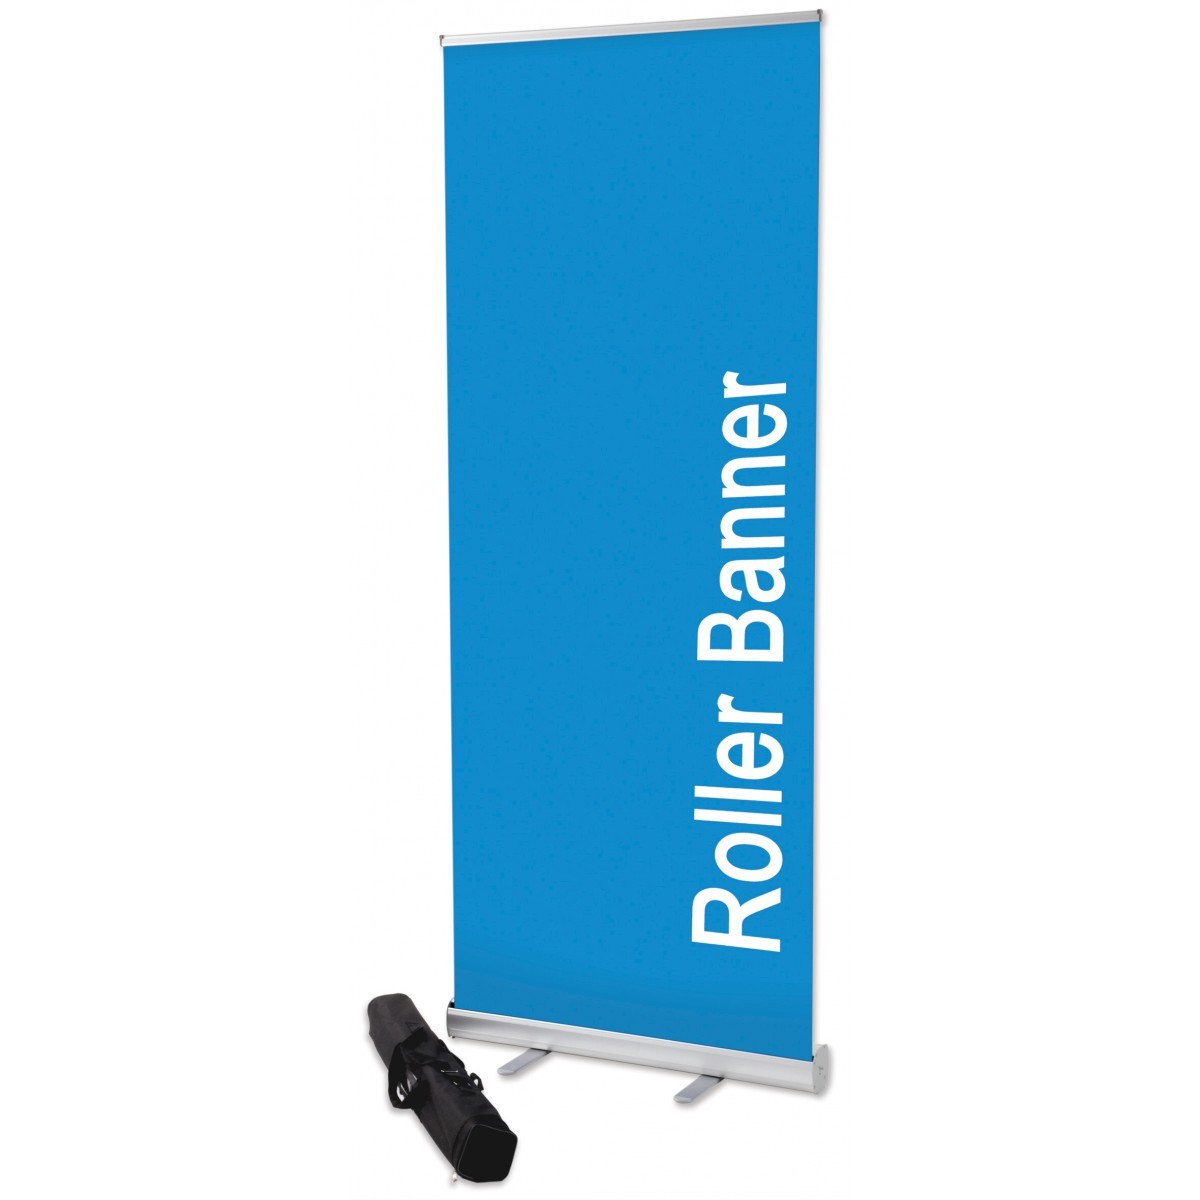 EZ Roll-up Banner Stands